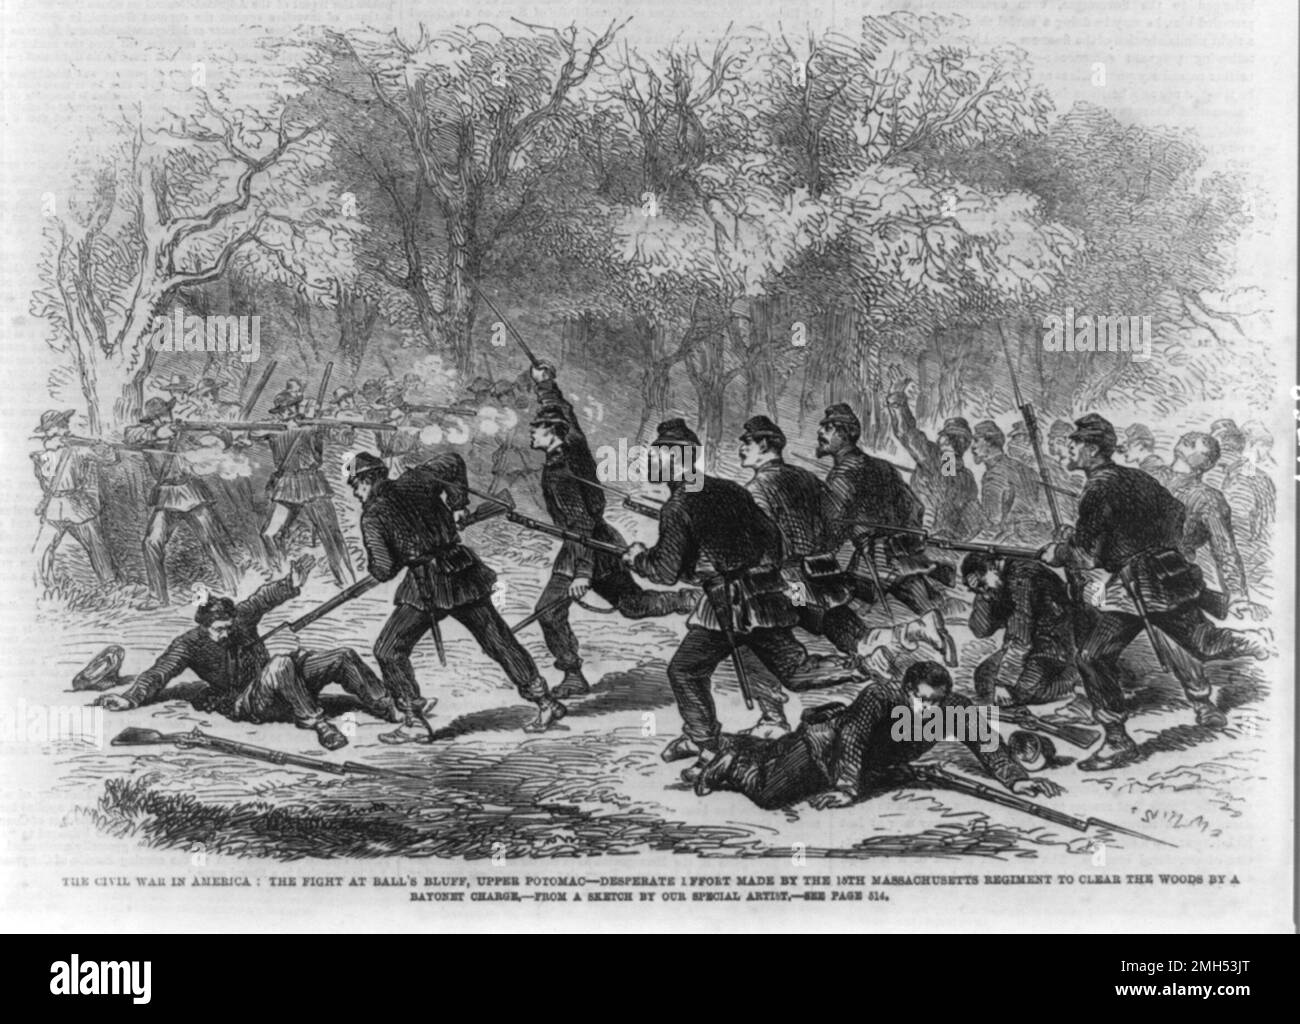 The Battle of Ball's Bluff was a battle in the American Civil War fought on October 21st 1861. It was won by the Confederate forces under General Nathan Evans and the Unionist senator,who was fighting as a colonel, was killed in the action. This painting depicts the a bayonet charge by the Unionist troops Stock Photo